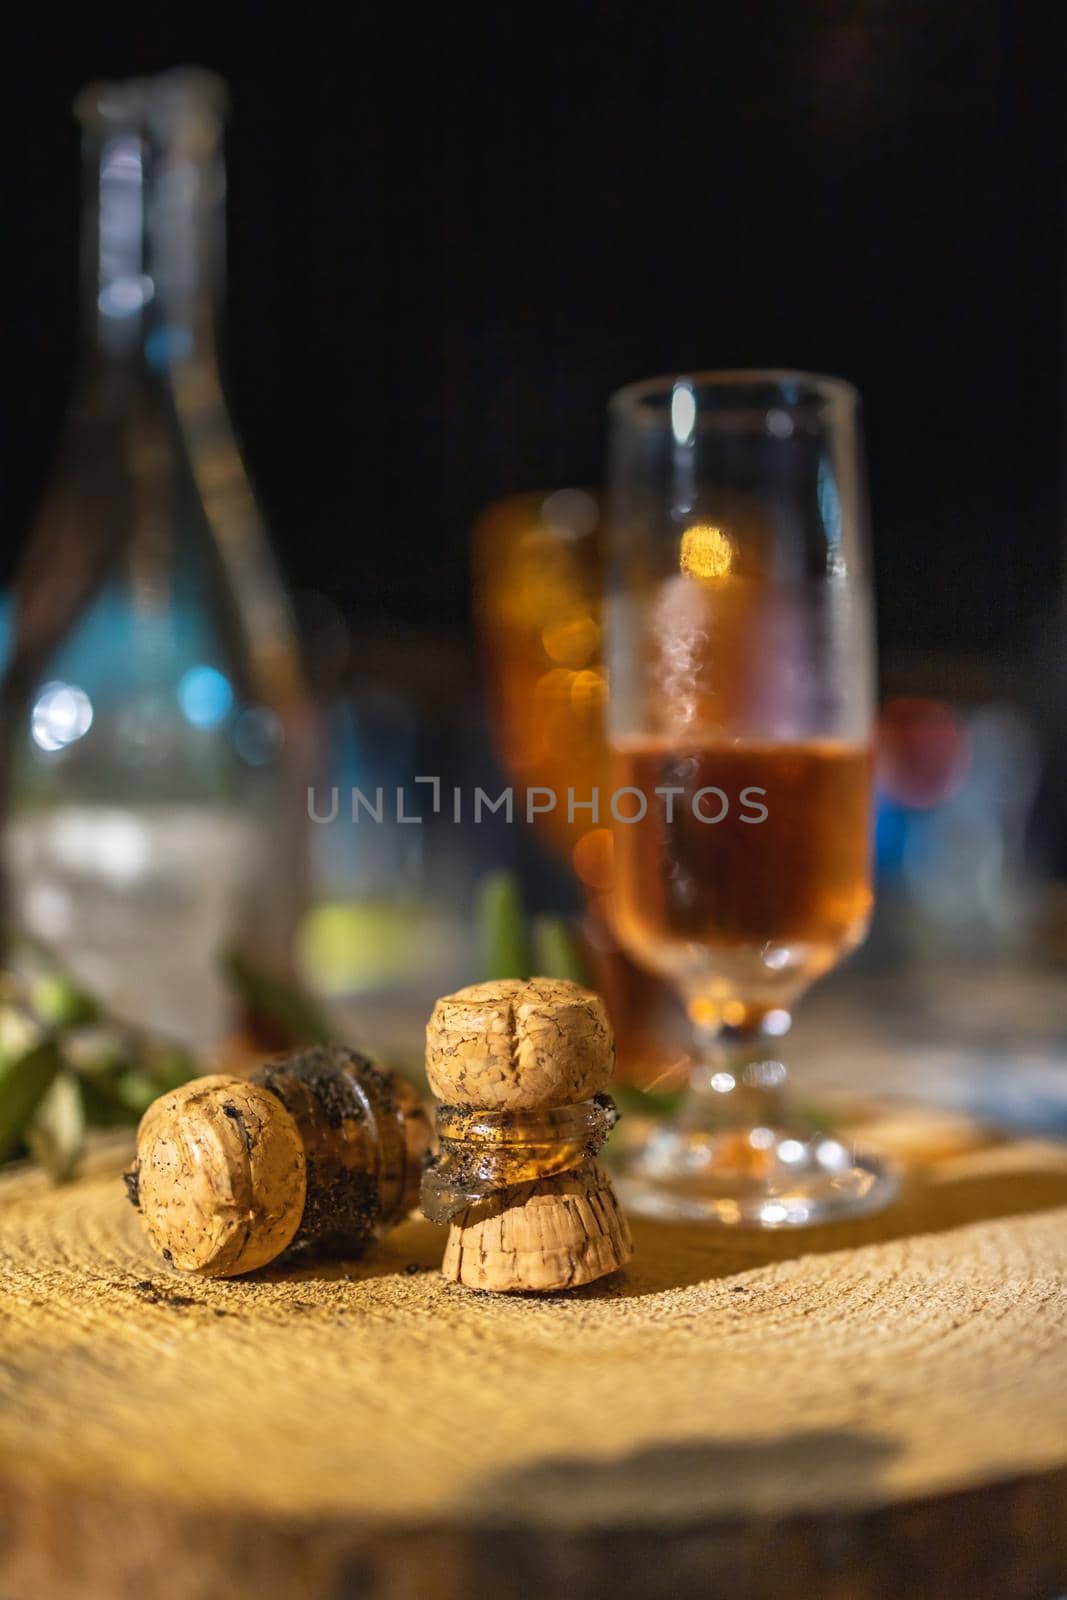 Glass of champagne with two broken corks lay on wooden board on table